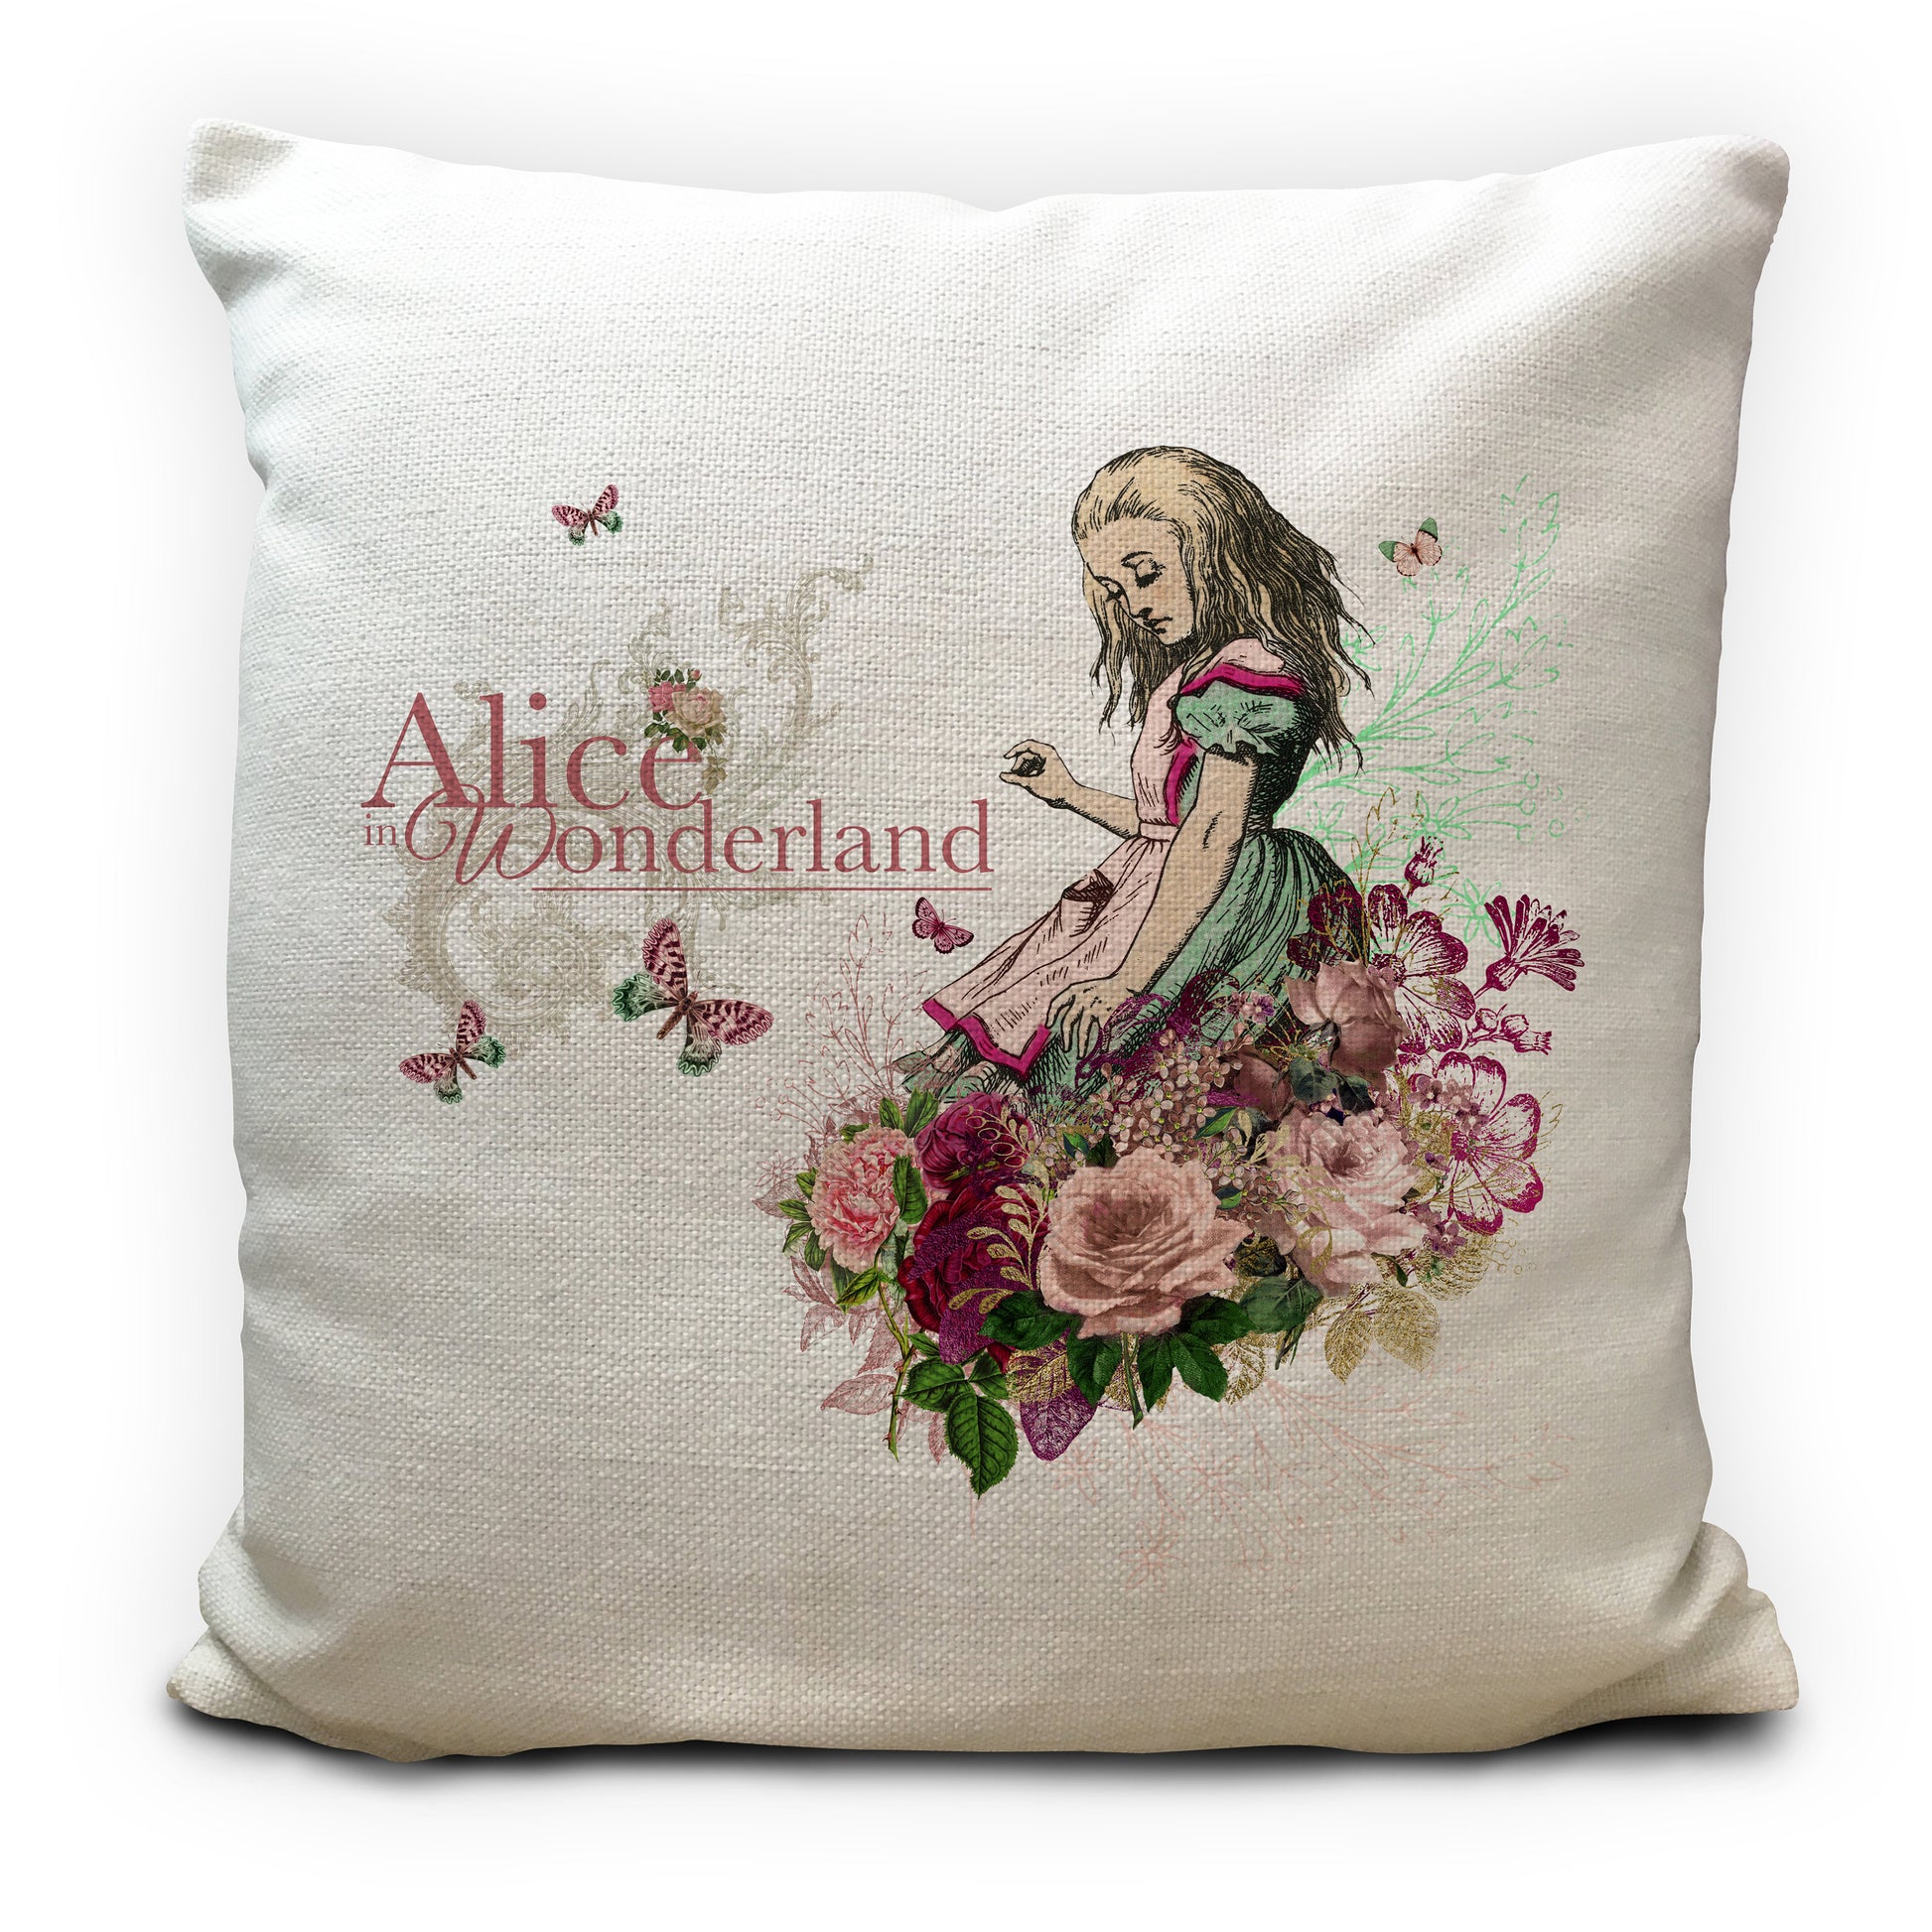 Alice in wonderland cushion cover with butterflies illustration